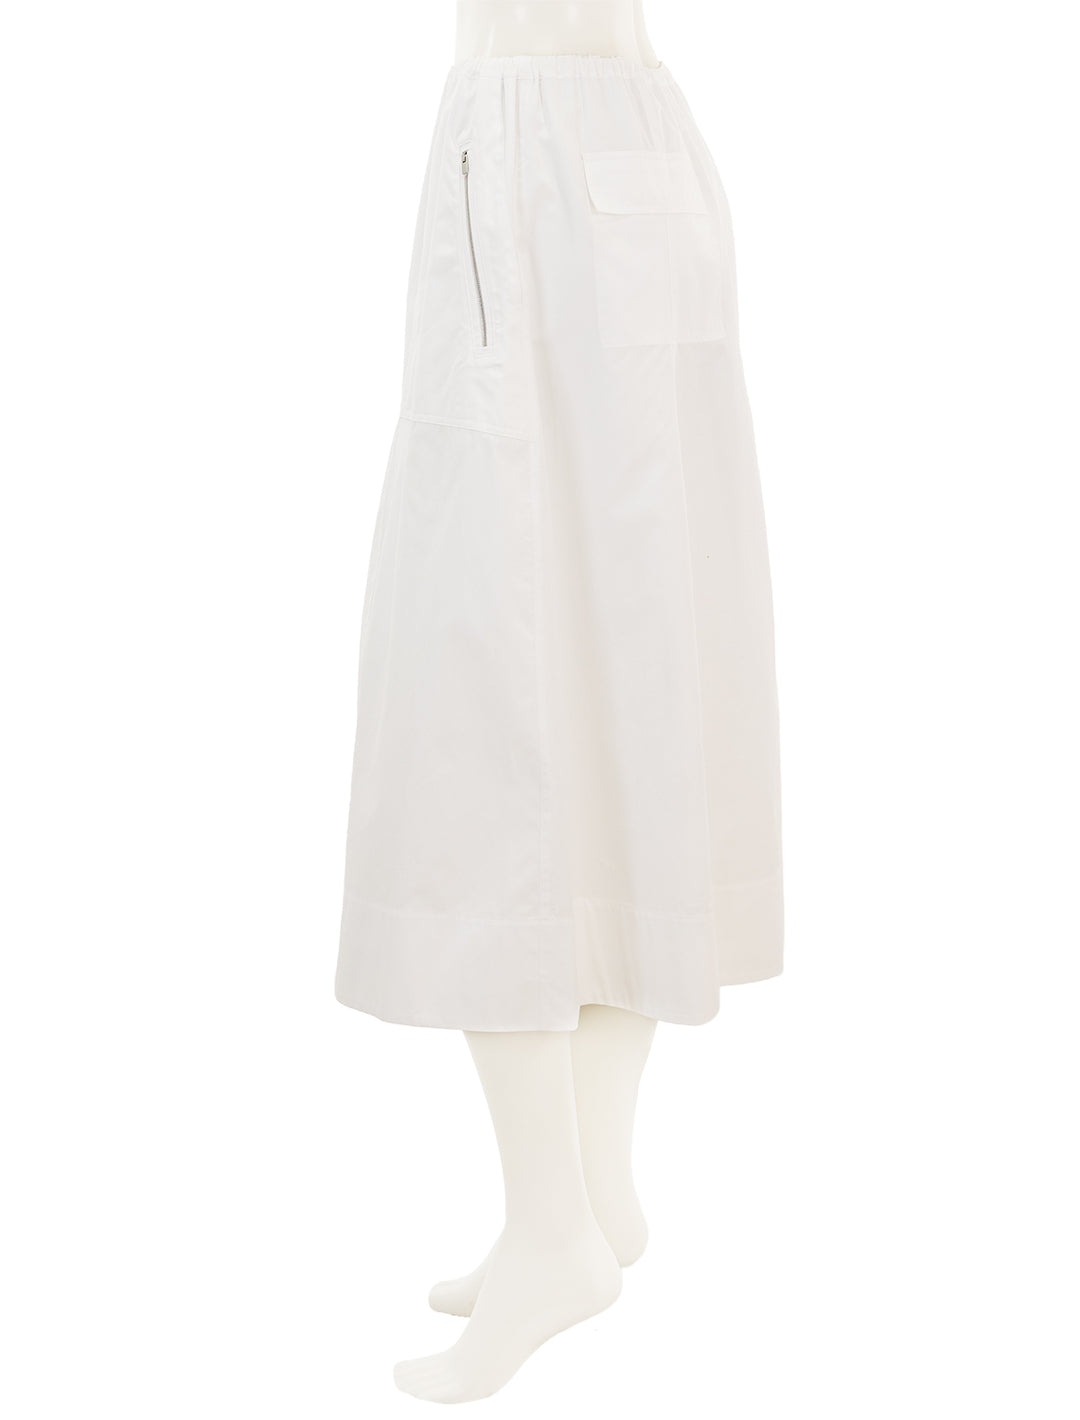 Side view of Vince's gathered utility zipper pocket skirt in optic white.